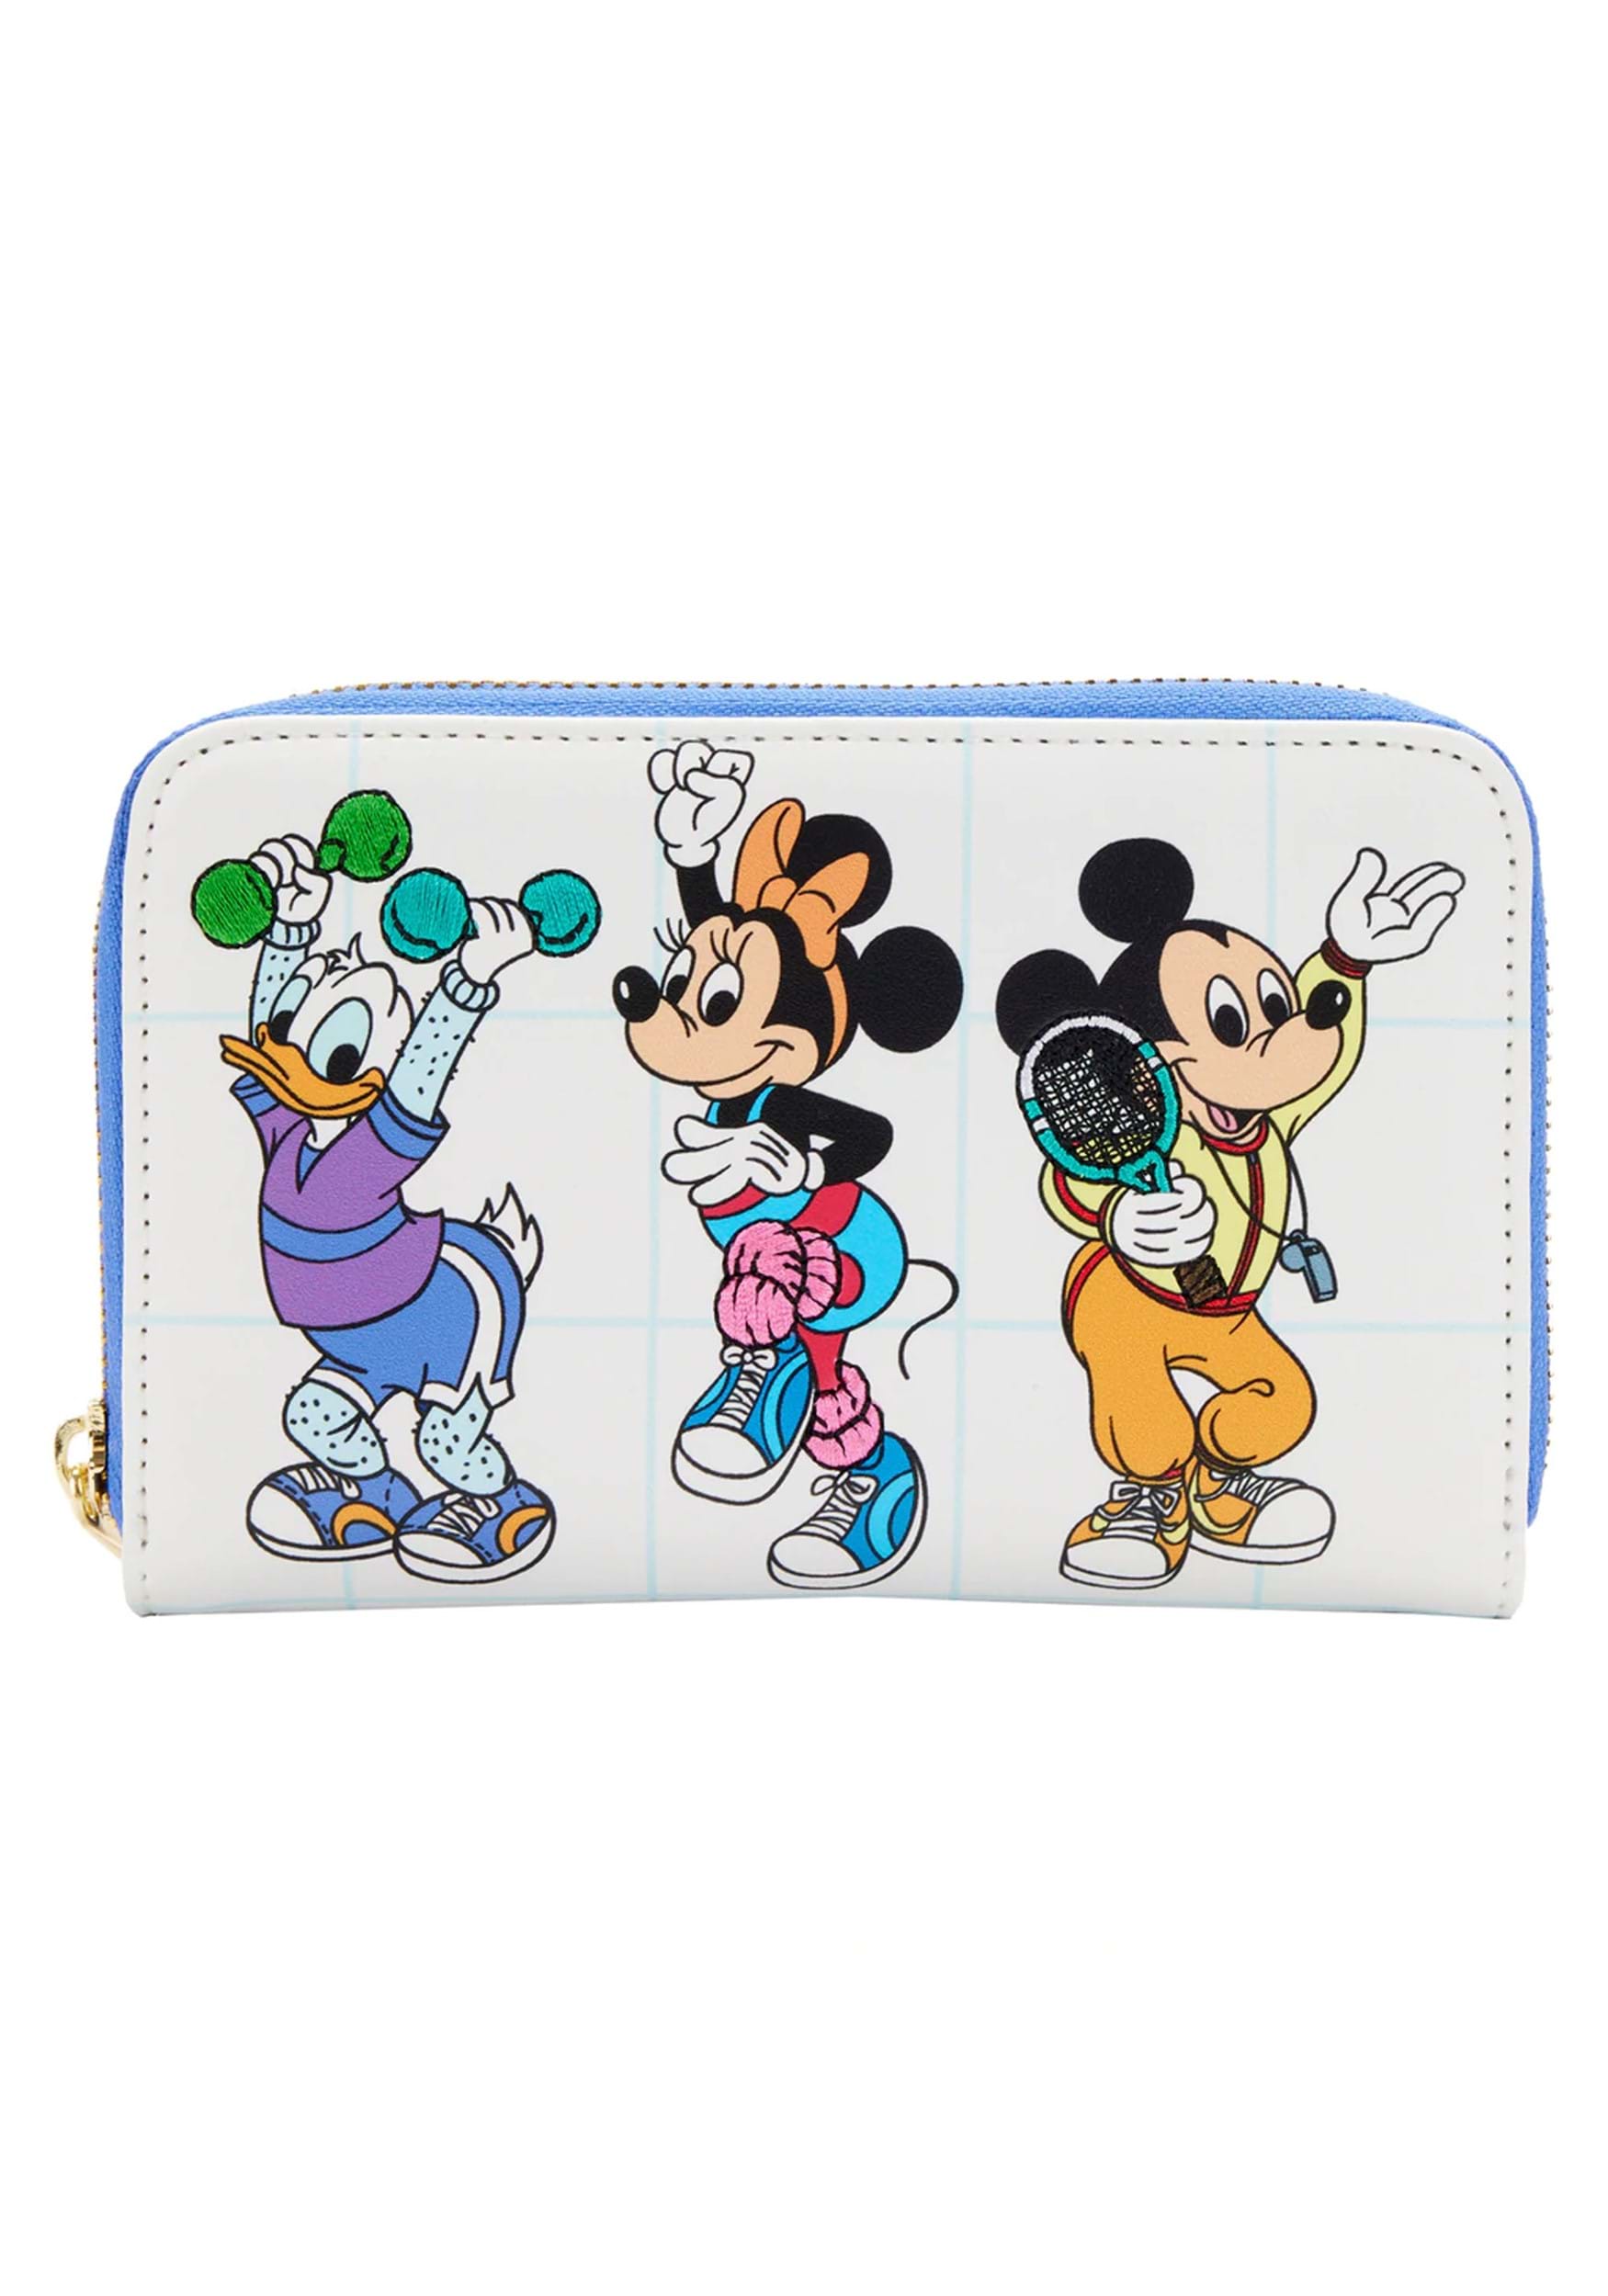 Loungefly Mousercise Zip Around Disney Wallet